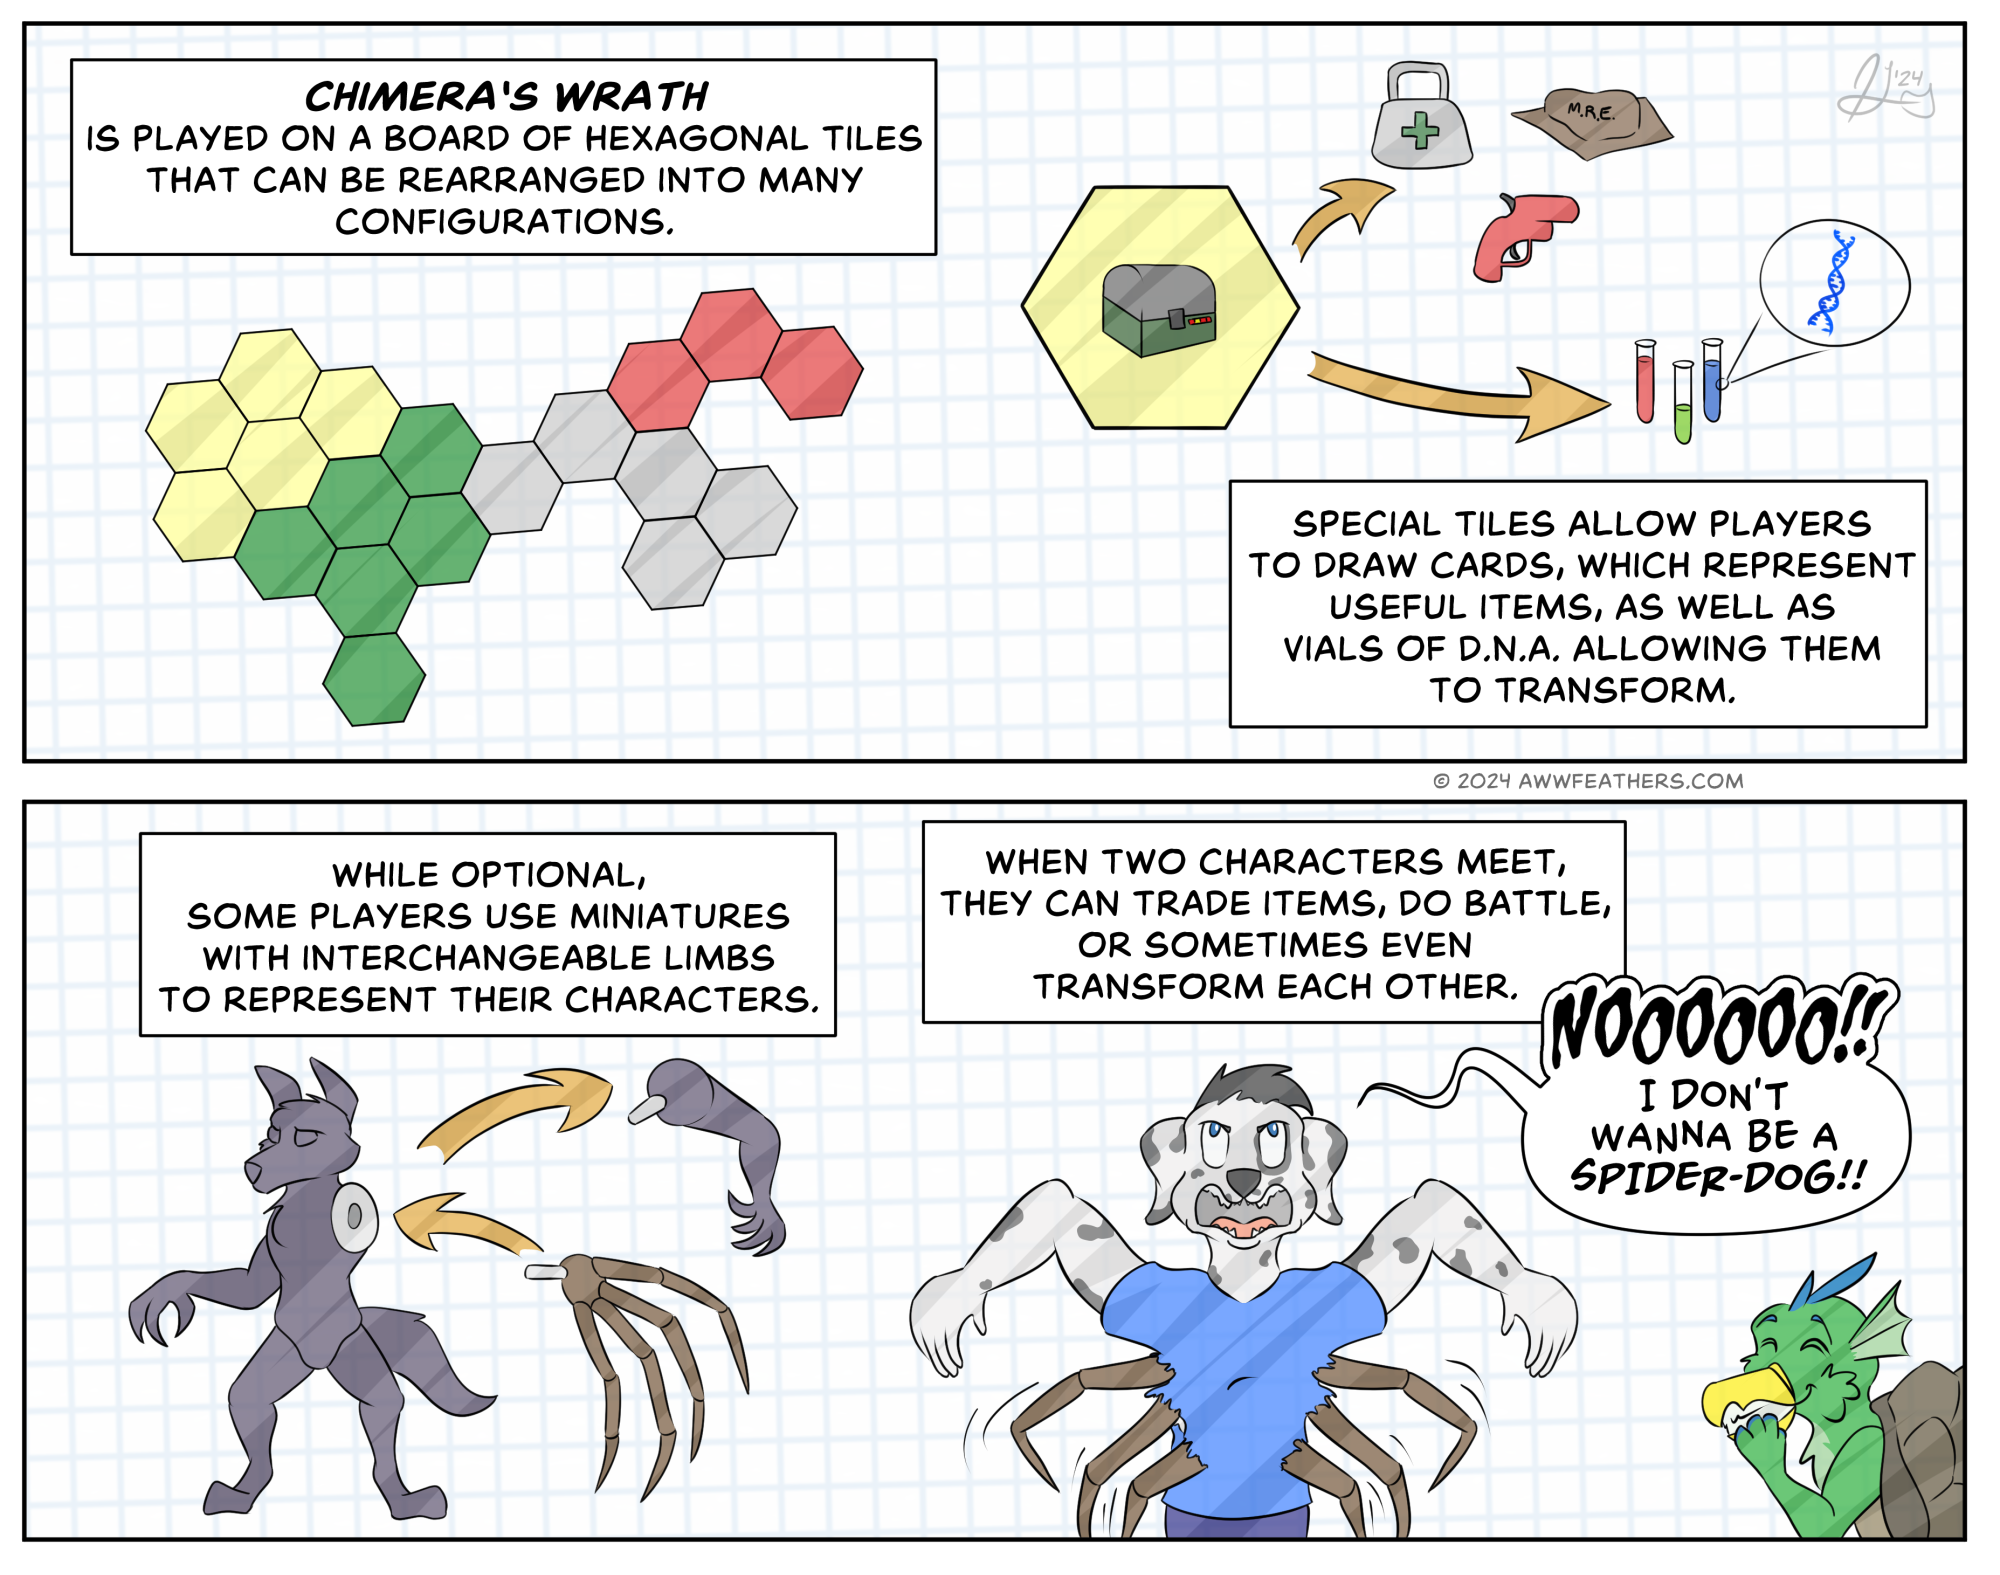 The caption reads, "Chimera's Wrath is played on a board of hexagonal tiles that can be rearranged into many configurations." We see a hexoganal board divided into regions of different colors. The caption continues, "Special tiles allow players to draw cards, which represent useful items, as well as vials of DNA allowing them to transform." We see one hexagonal tile marked with a box, and arrows pointing from the box to various items, including a medical kit, a package labeled "M.R.E.", a flare gun, and several vials of colored liquid. A closeup of one of the vials reveals a strand of DNA within it. Next, the caption says, "While optional, some players use miniatures with interchangeable limbs to represent their characters." We see a canine figurine whose arm has been removed, and is being replaced with a piece containing four spider legs. The final caption reads, "When two characters meet, they can trade items, do battle, or sometimes even transform each other." We see Chris, holding his normal arms up as two rows of spider legs sprout beneath them. He is glaring upward and shouting, "NOOOOOO!! I don't wanna be a spider-dog!!" while Dil (still wearing his tortoise shell) grins and chuckles from nearby.